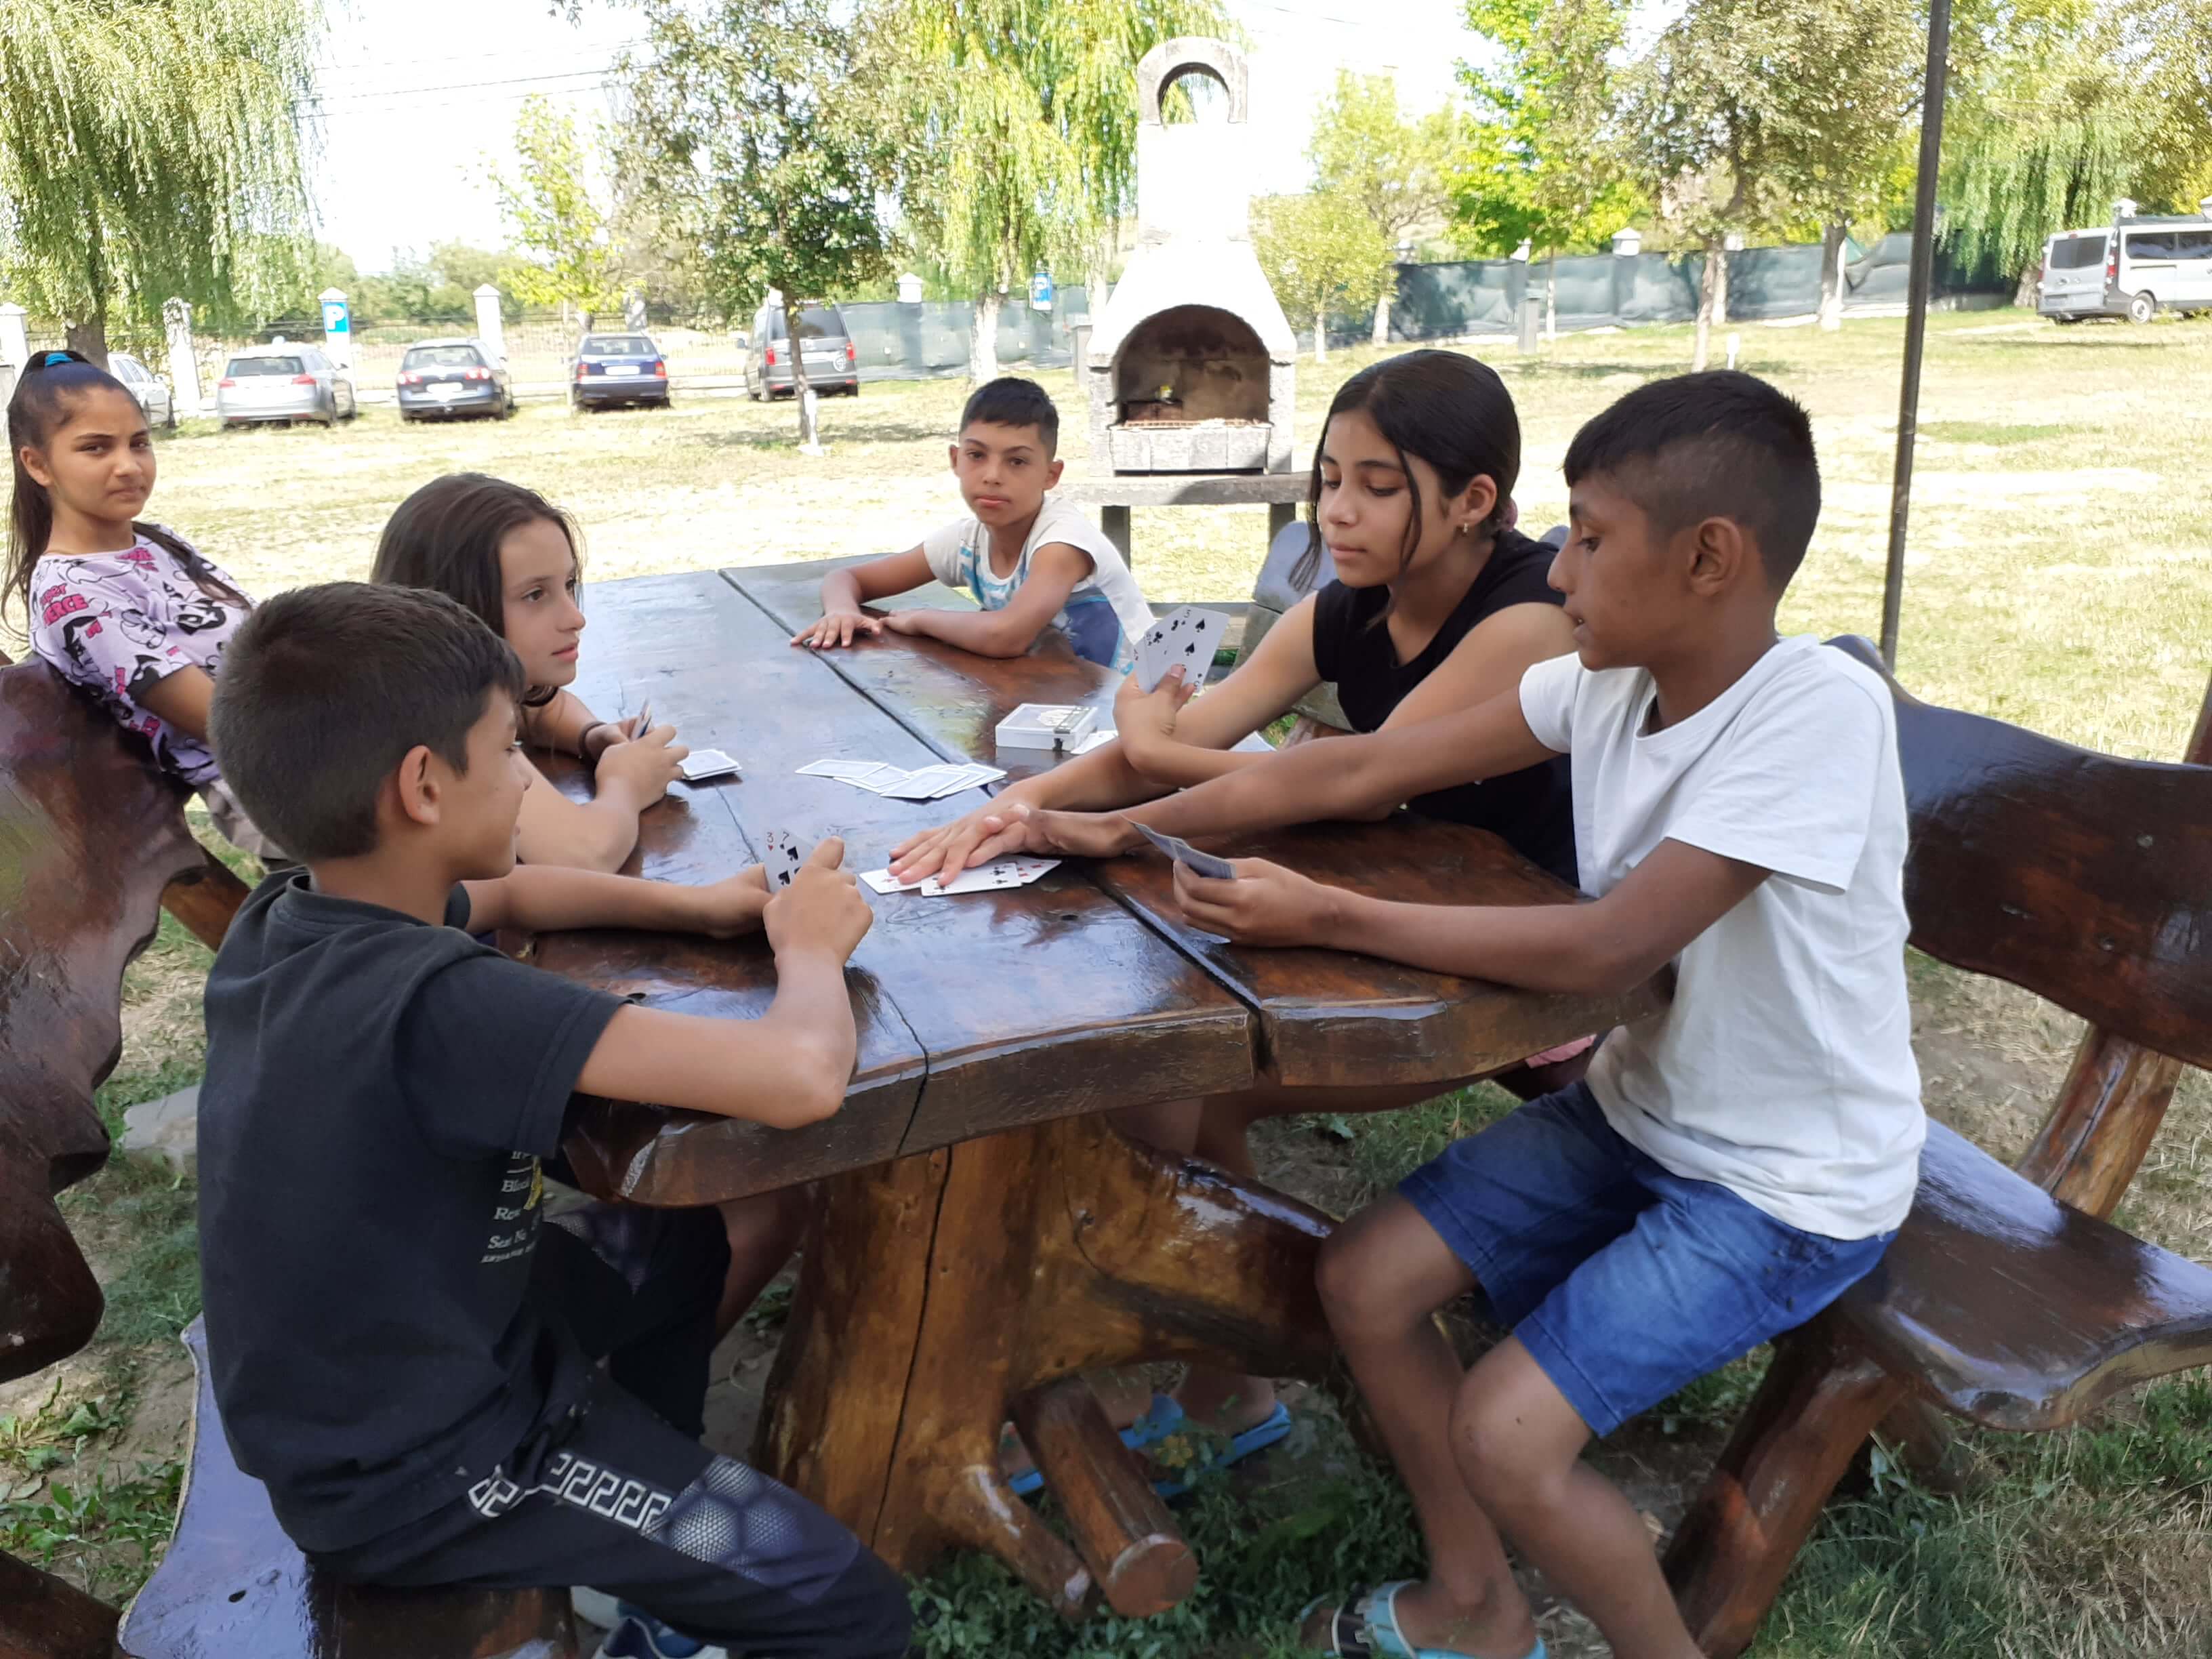 Sorin enjoys a game with friends at camp